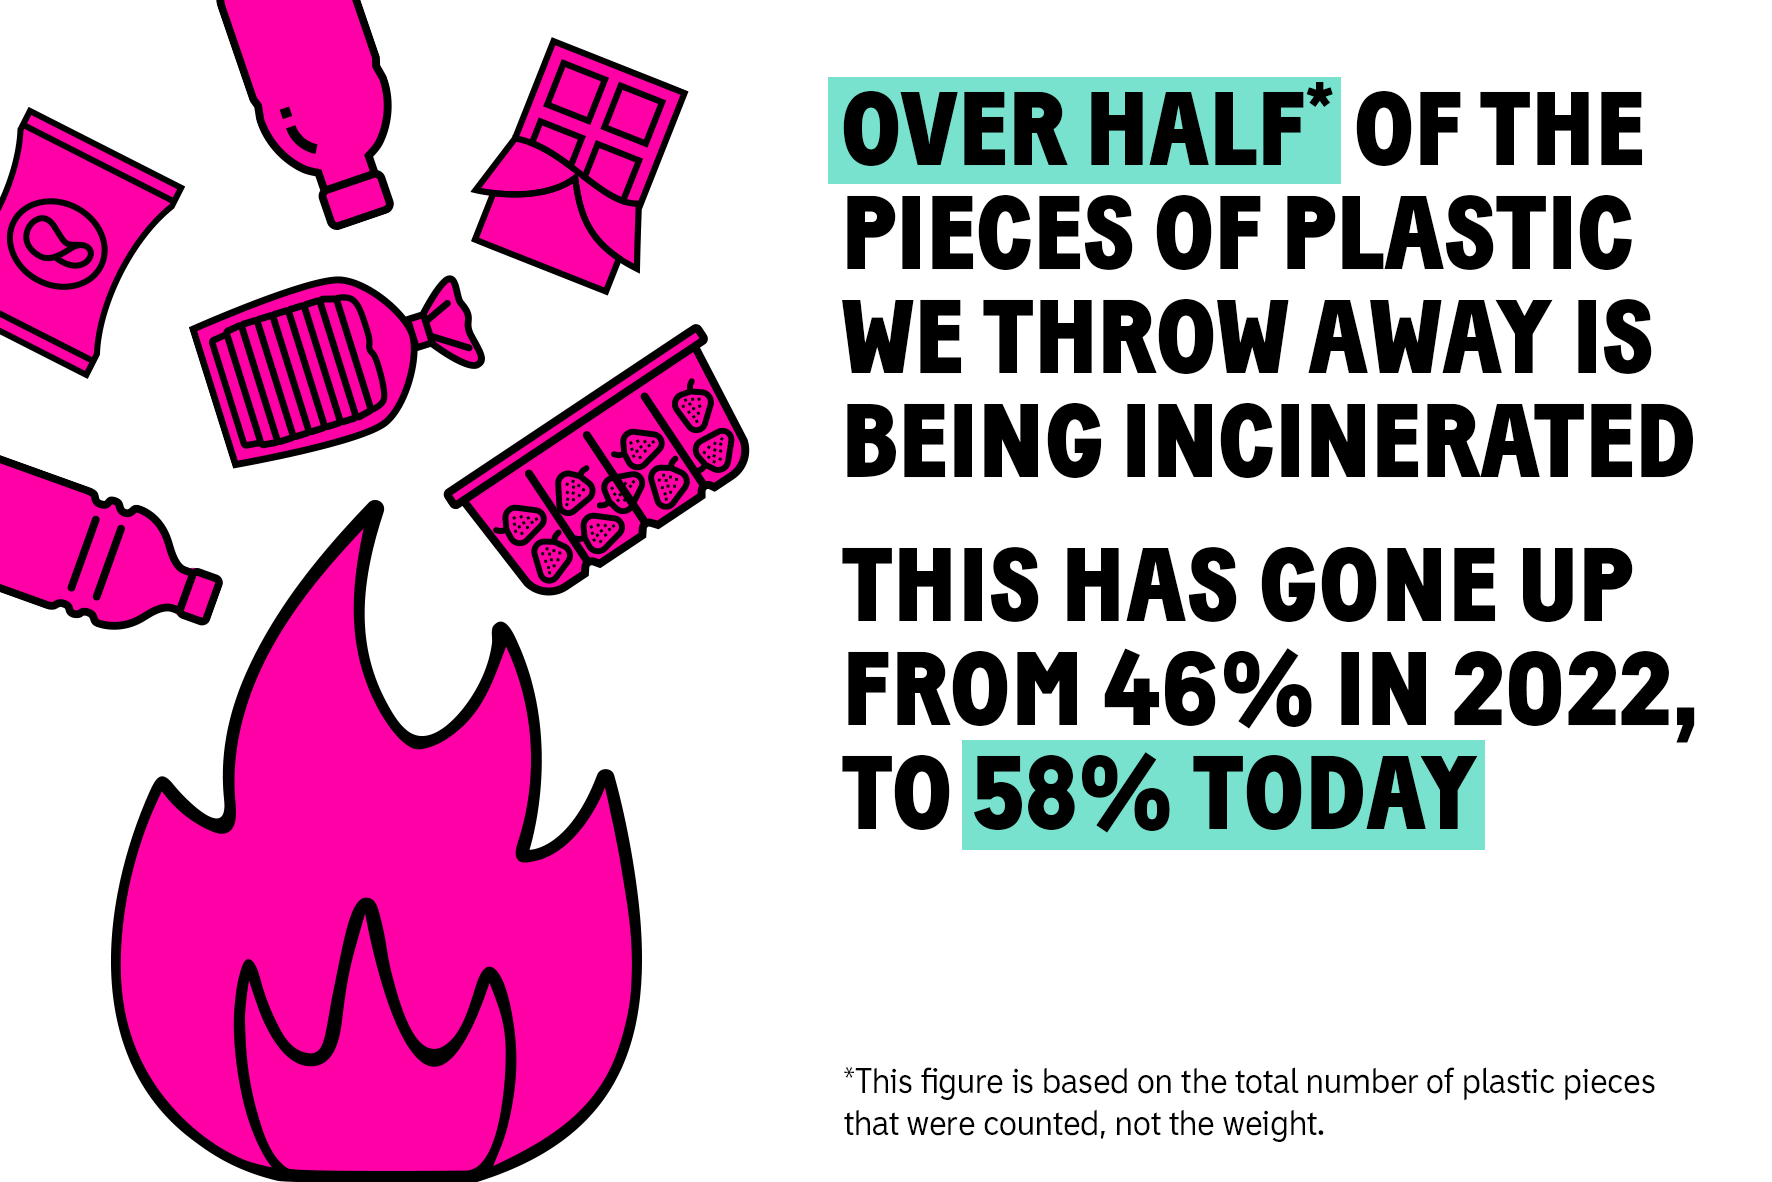 Over half of the pieces of plastic we throw away is being incinerated. This has gone up from 46% in 2022, to 58% today